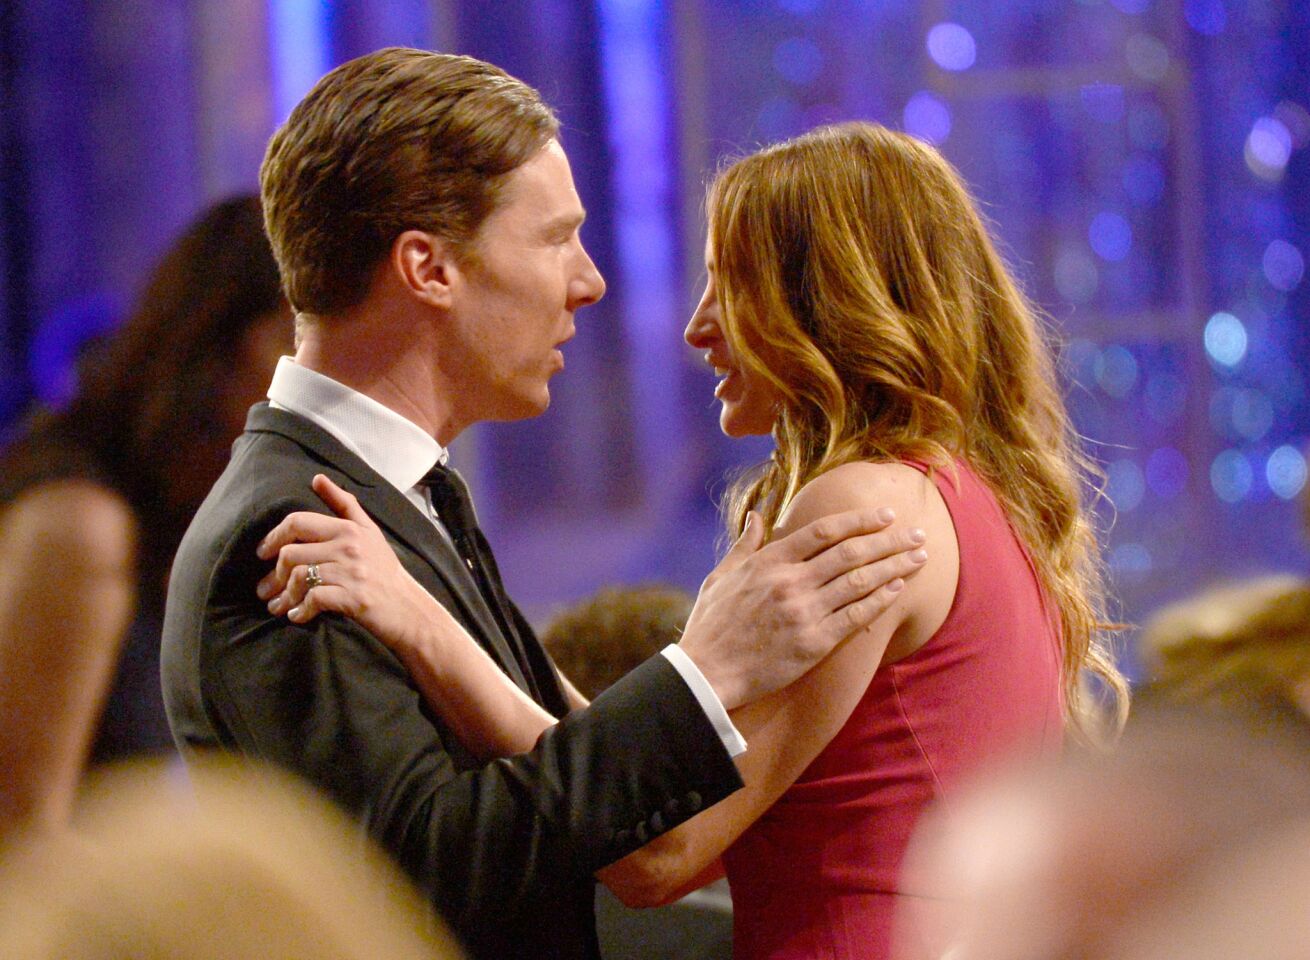 Cumberbatch and his "August: Osage County" costar Julia Roberts were among cast members nominated in the ensemble acting category at the 2014 SAG Awards.